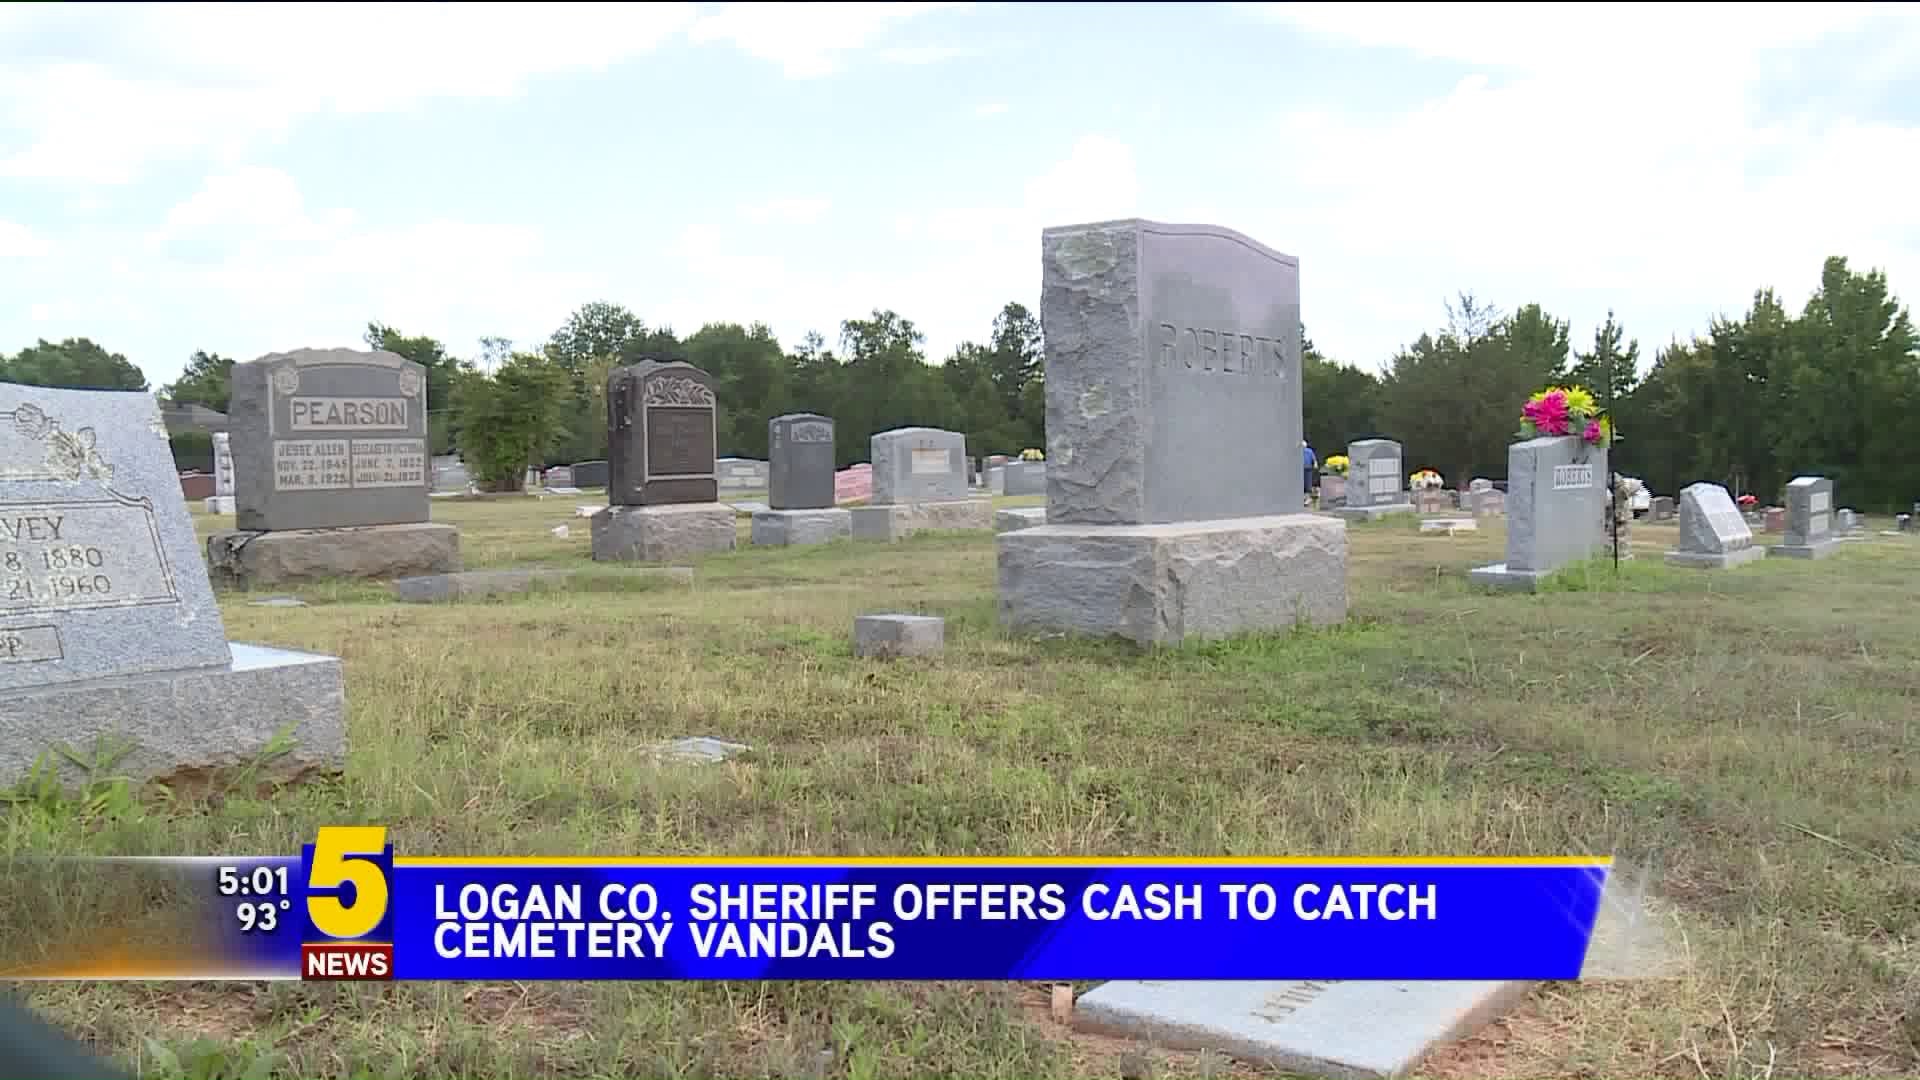 Logan Co. Sheriff Offers Reward For Cemetery Vandal